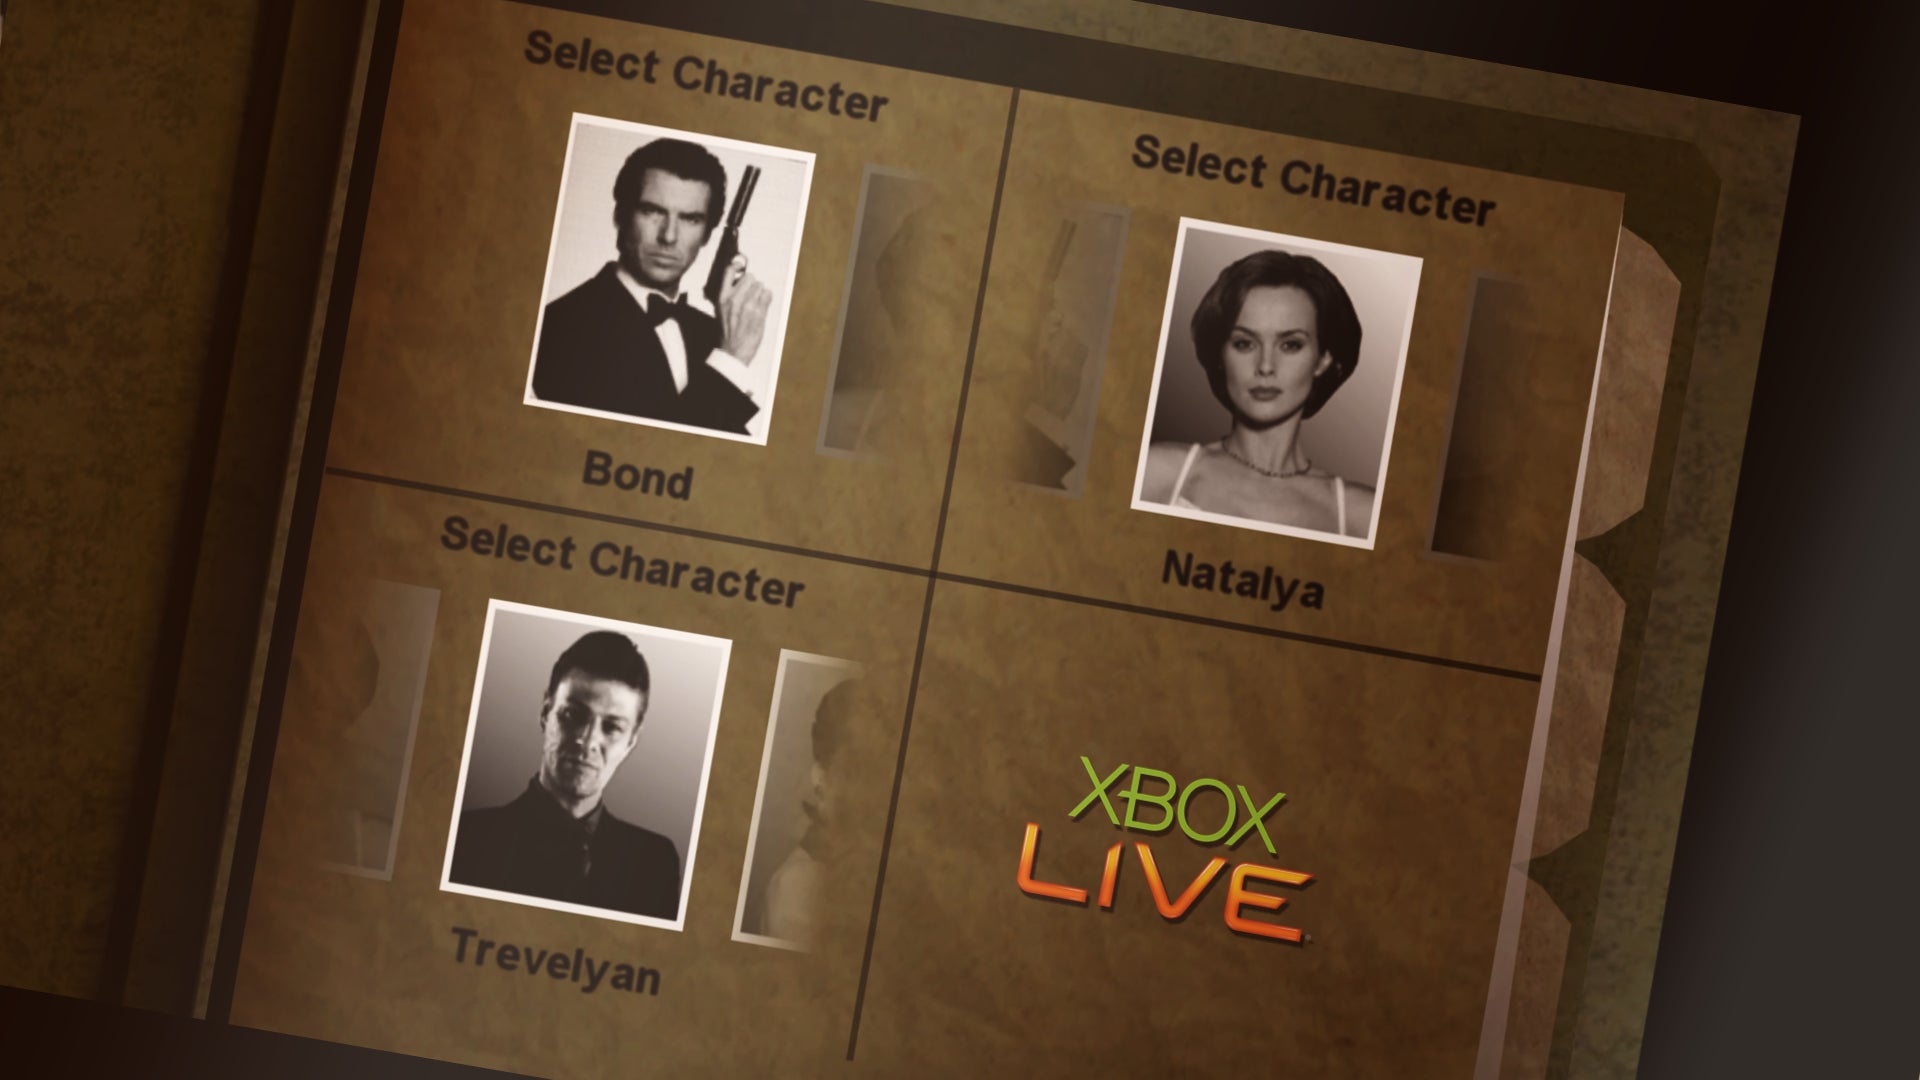 Image for Want to play GoldenEye 007 multiplayer online on Xbox? There is a way – sort of